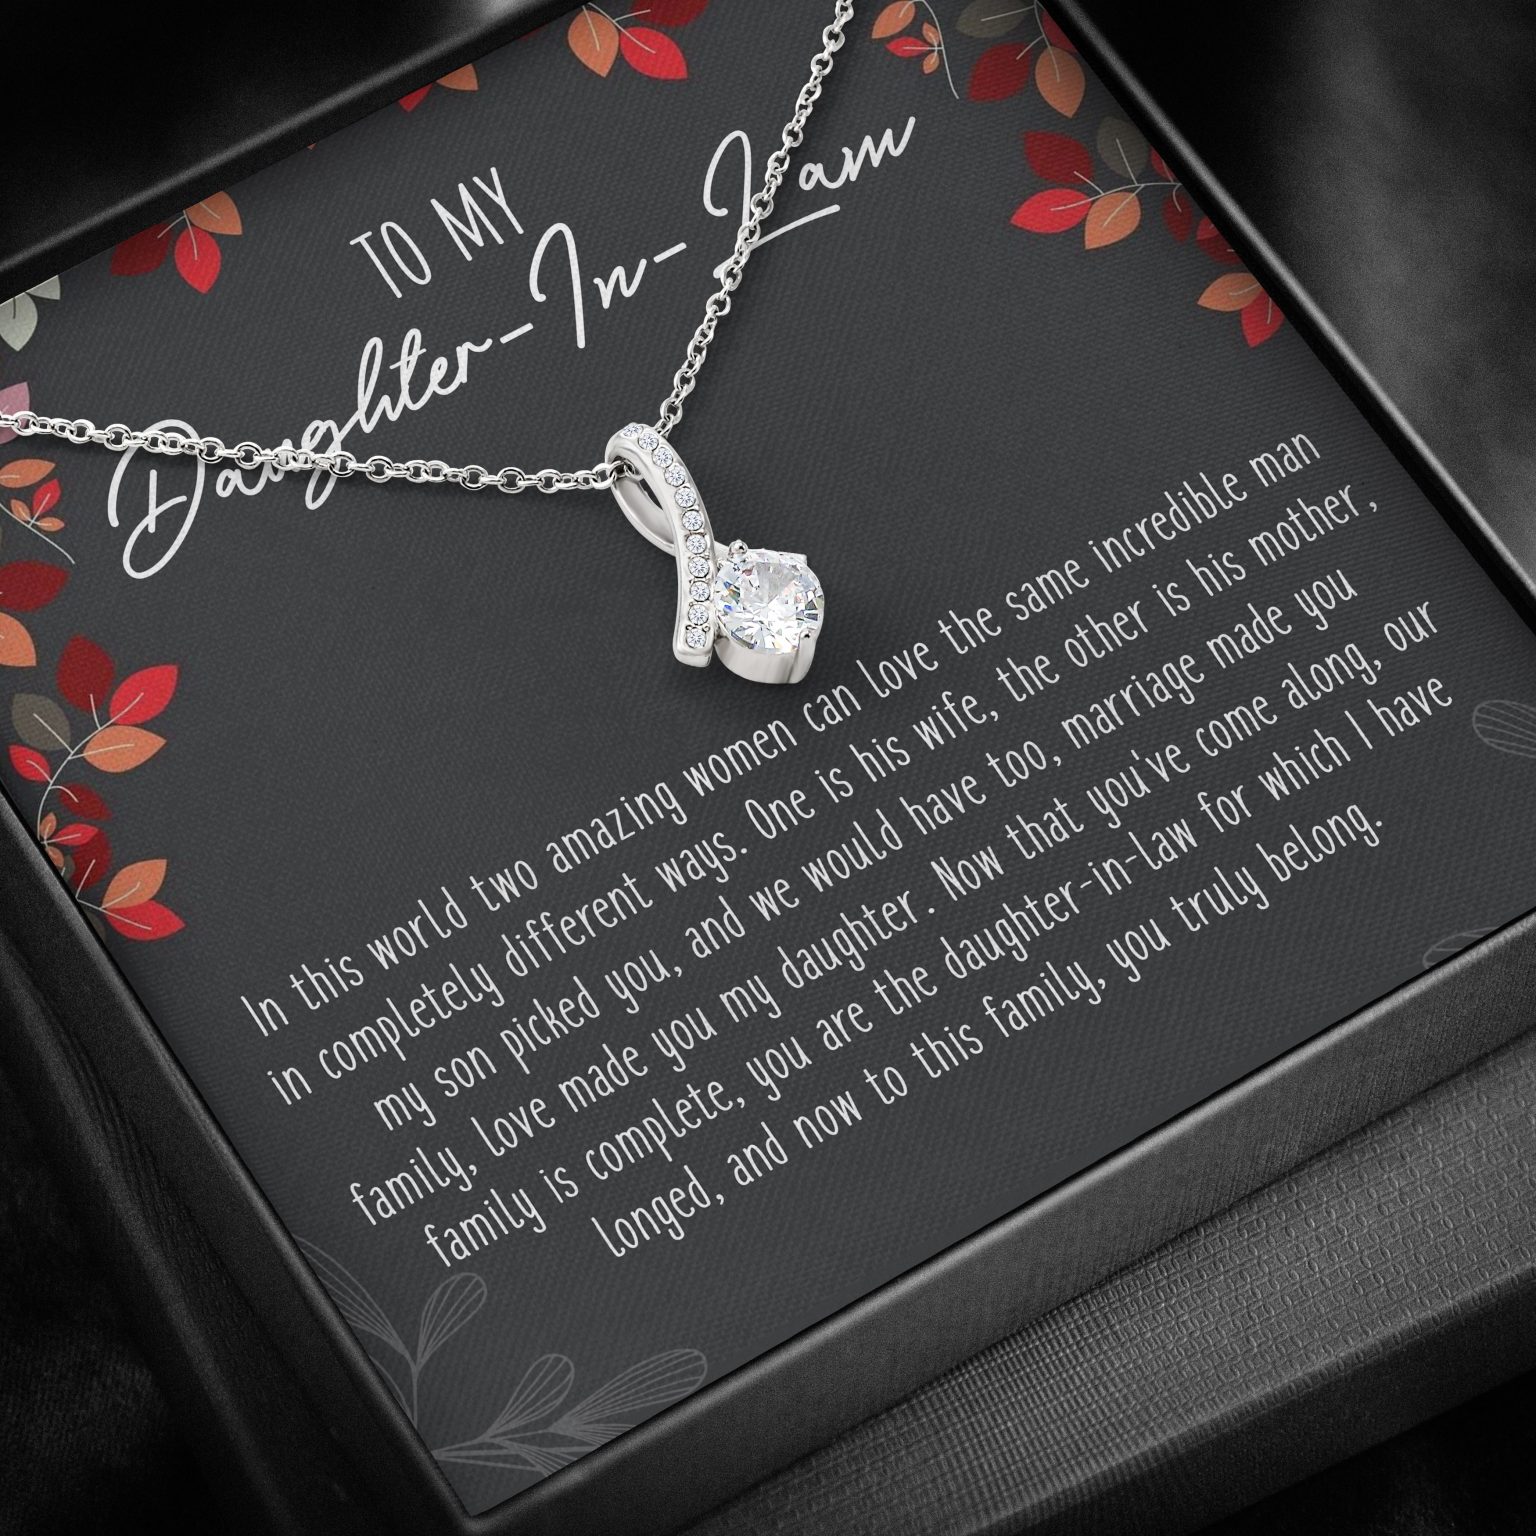 Daughter In Law T Necklace To My Daughter In Law With Box Message Card Alluring Beauty